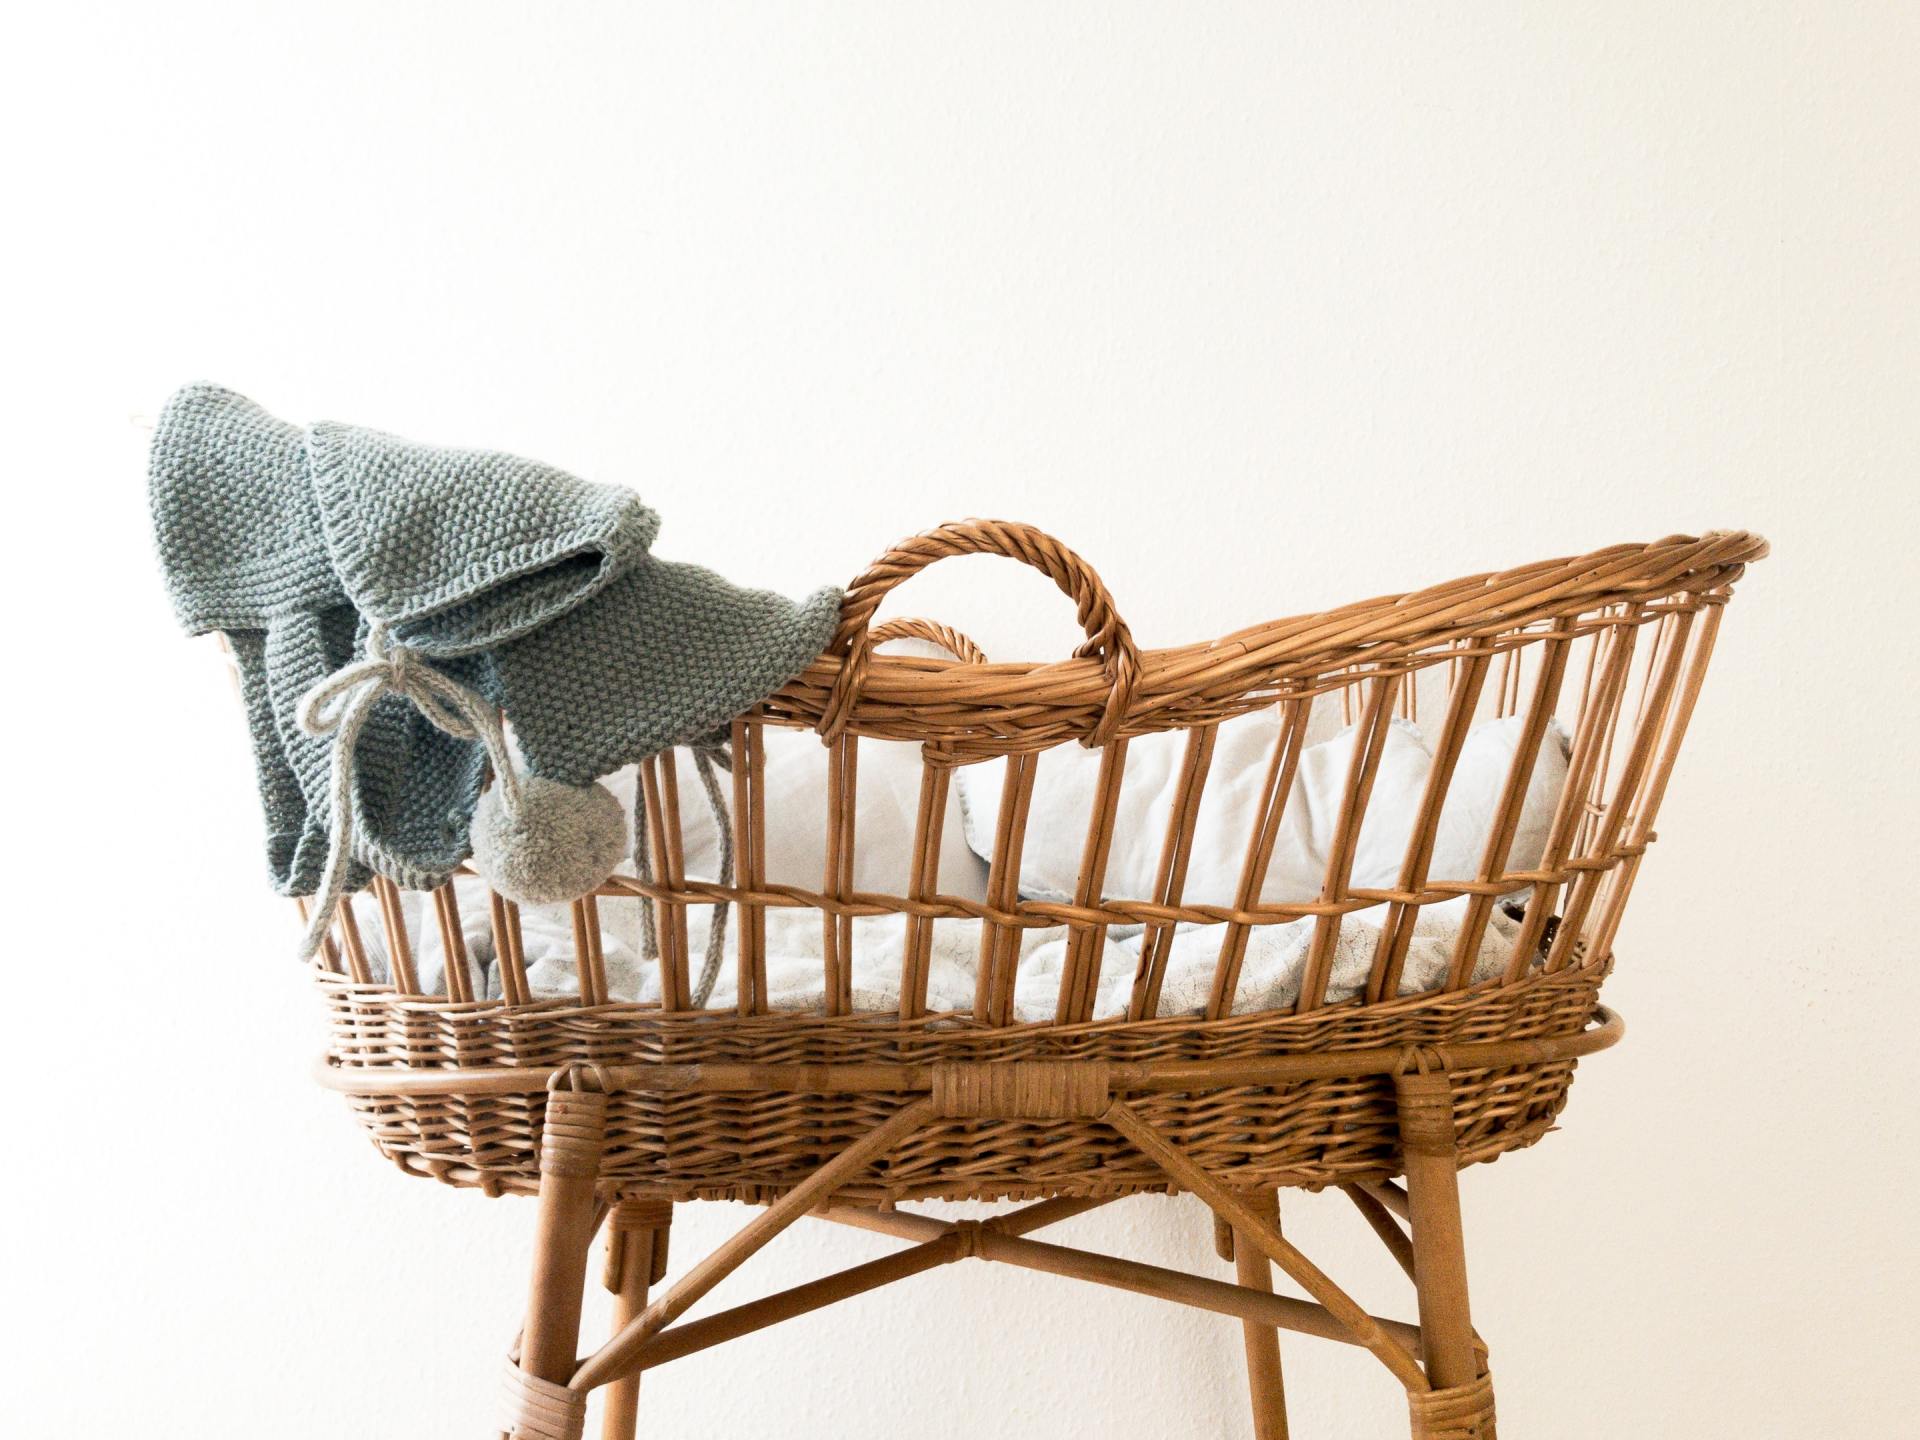 A photo of a wicker bassinet with a gray knit blanket draped over the left side, set against a light background.